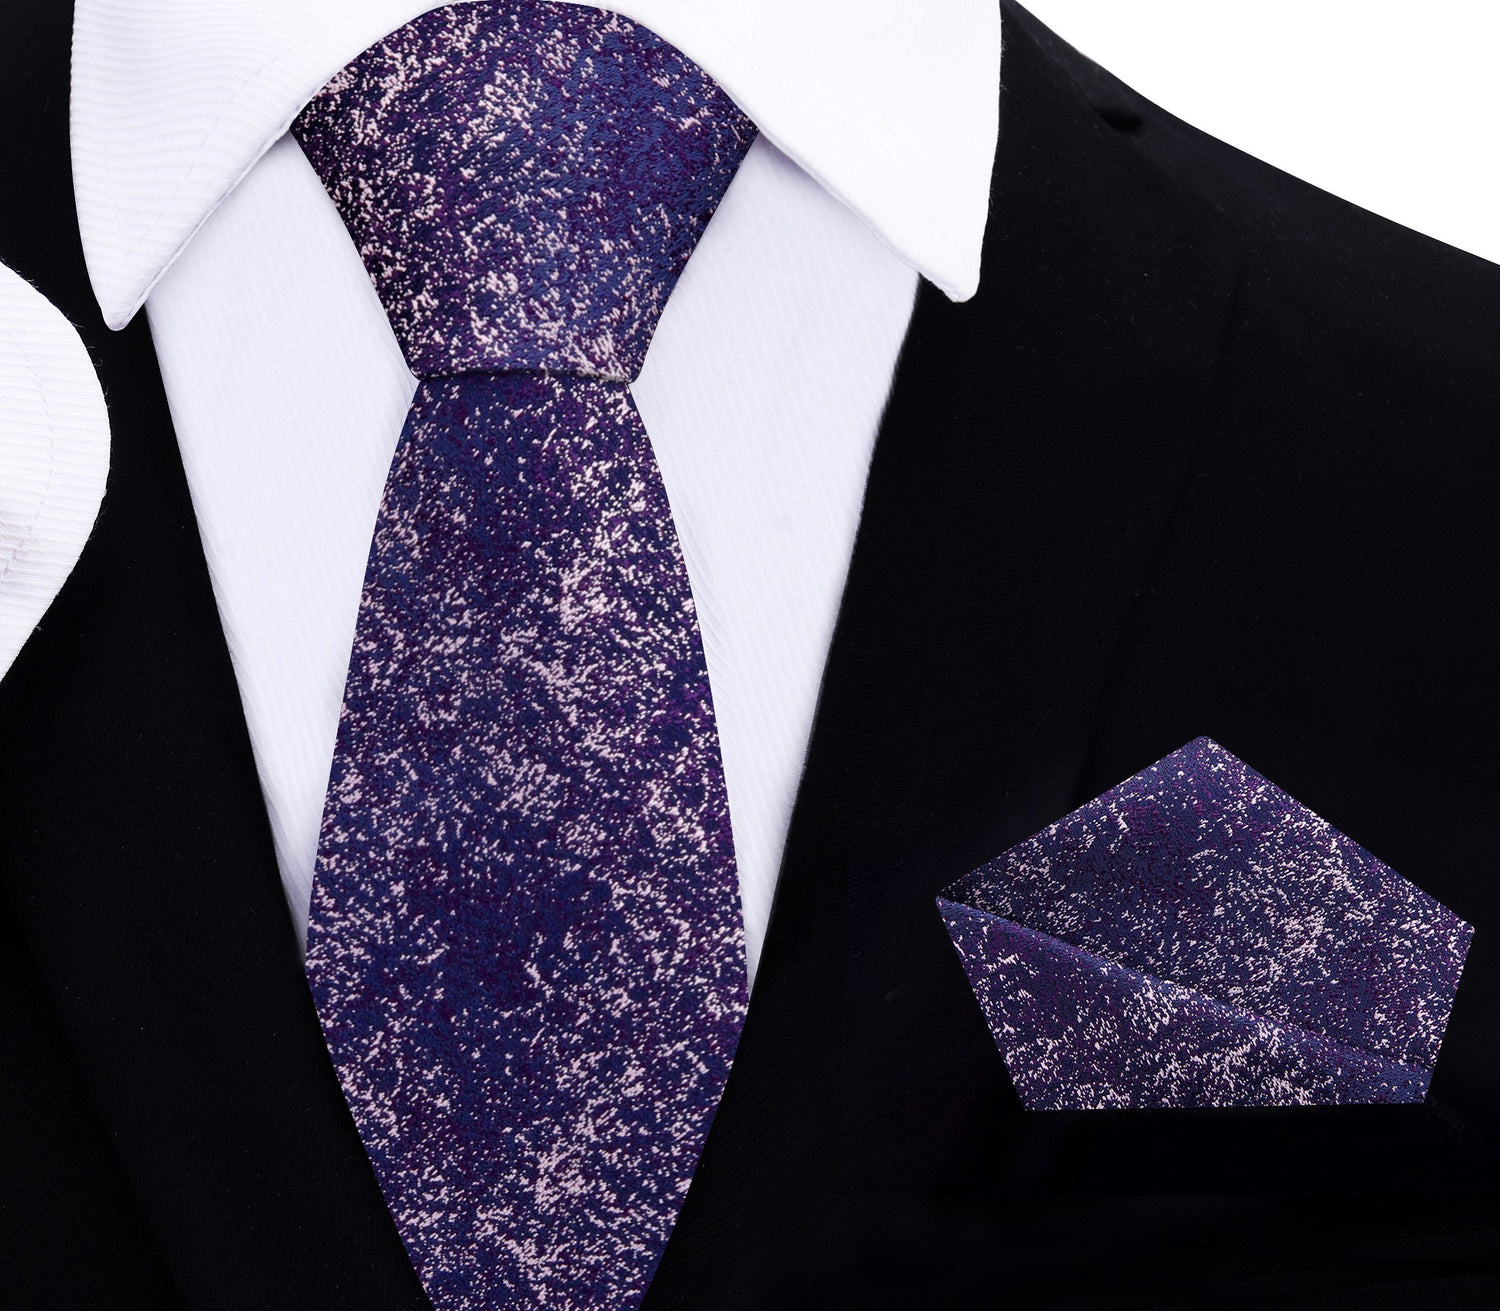 A Fusion Purple, Persian Violet, Light Sand Color Abstract Textured Pattern Silk Thin Tie, Pocket Square